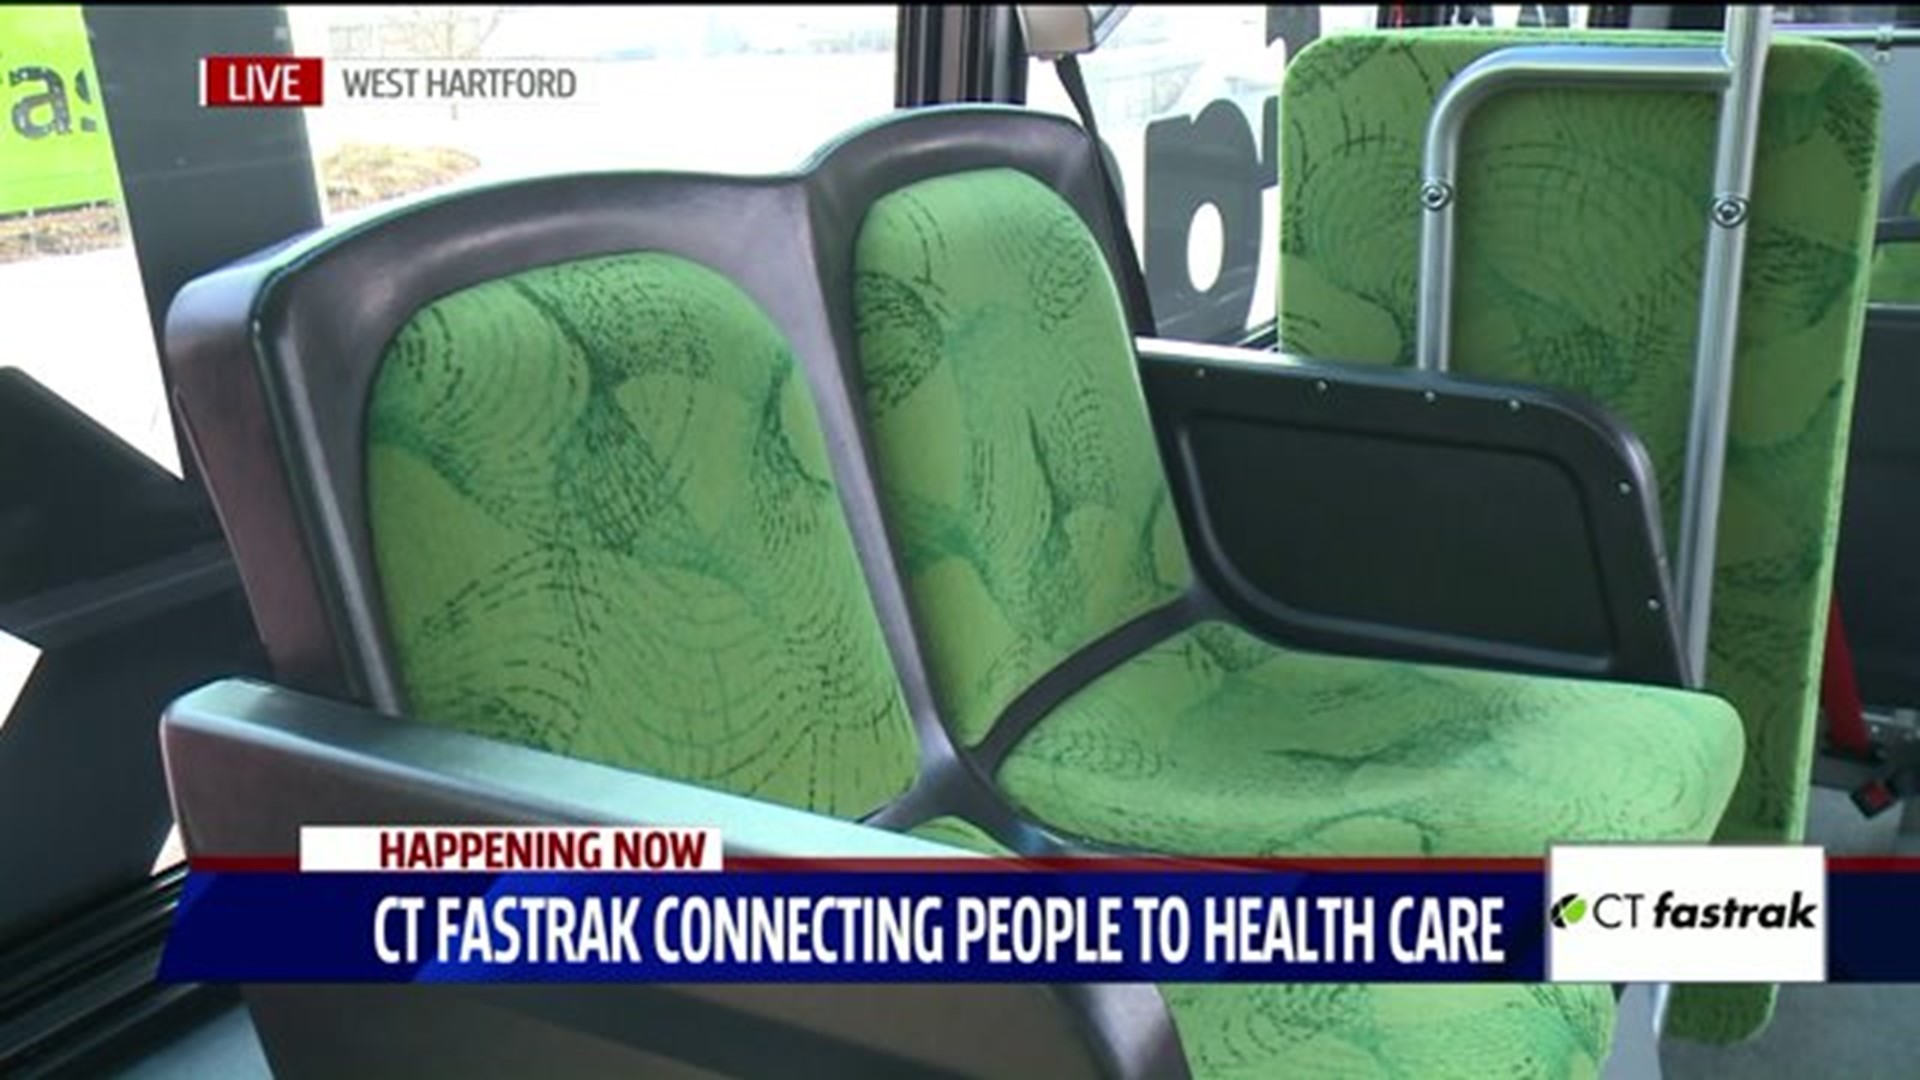 Using CTfastrak to get to health care organizations